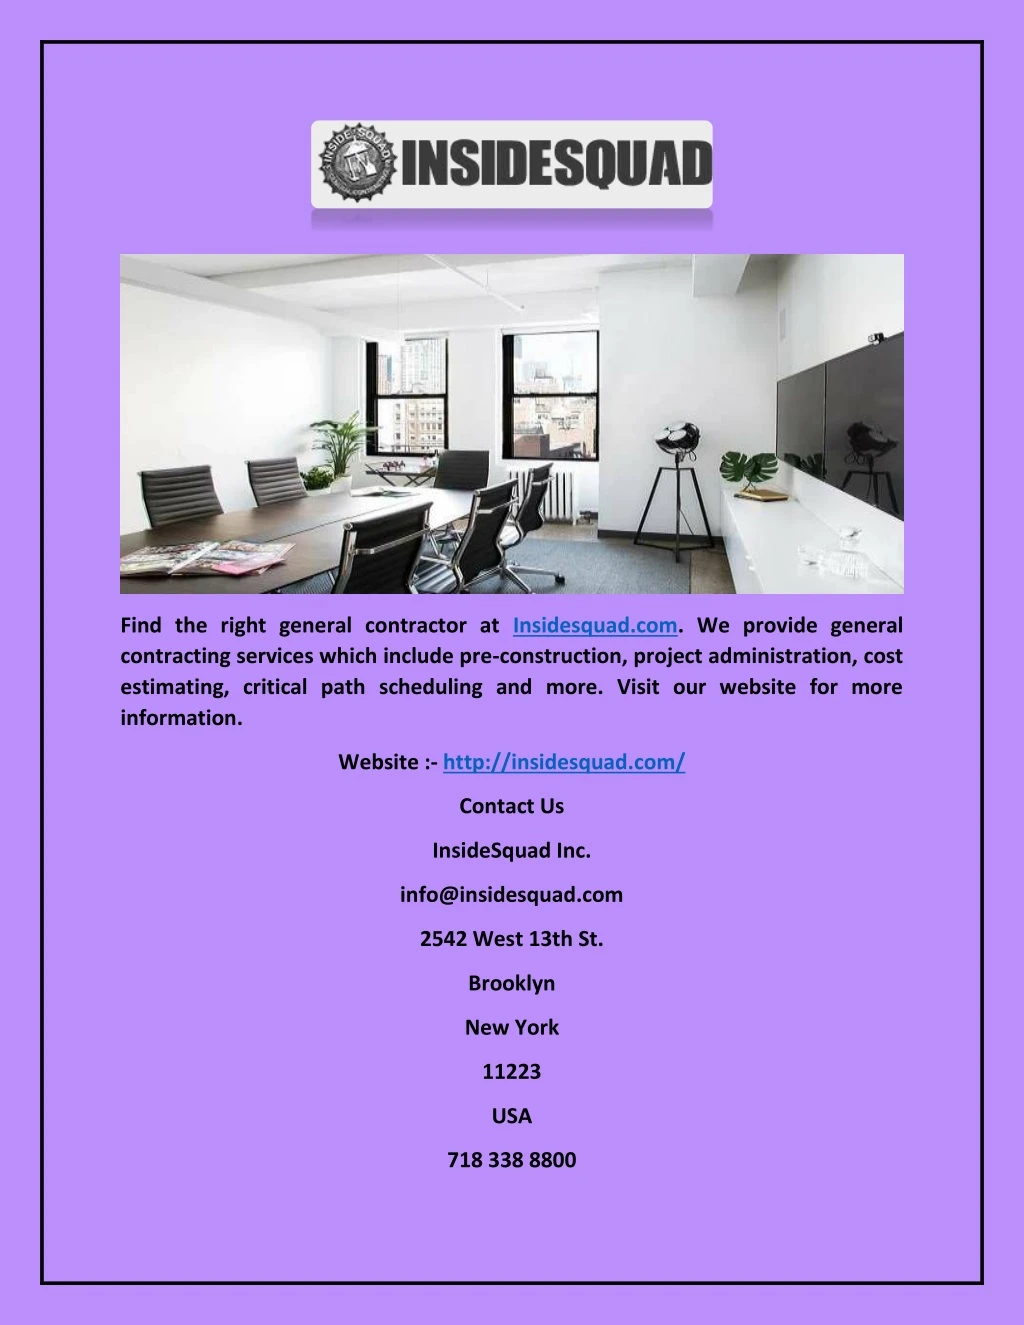 find the right general contractor at insidesquad